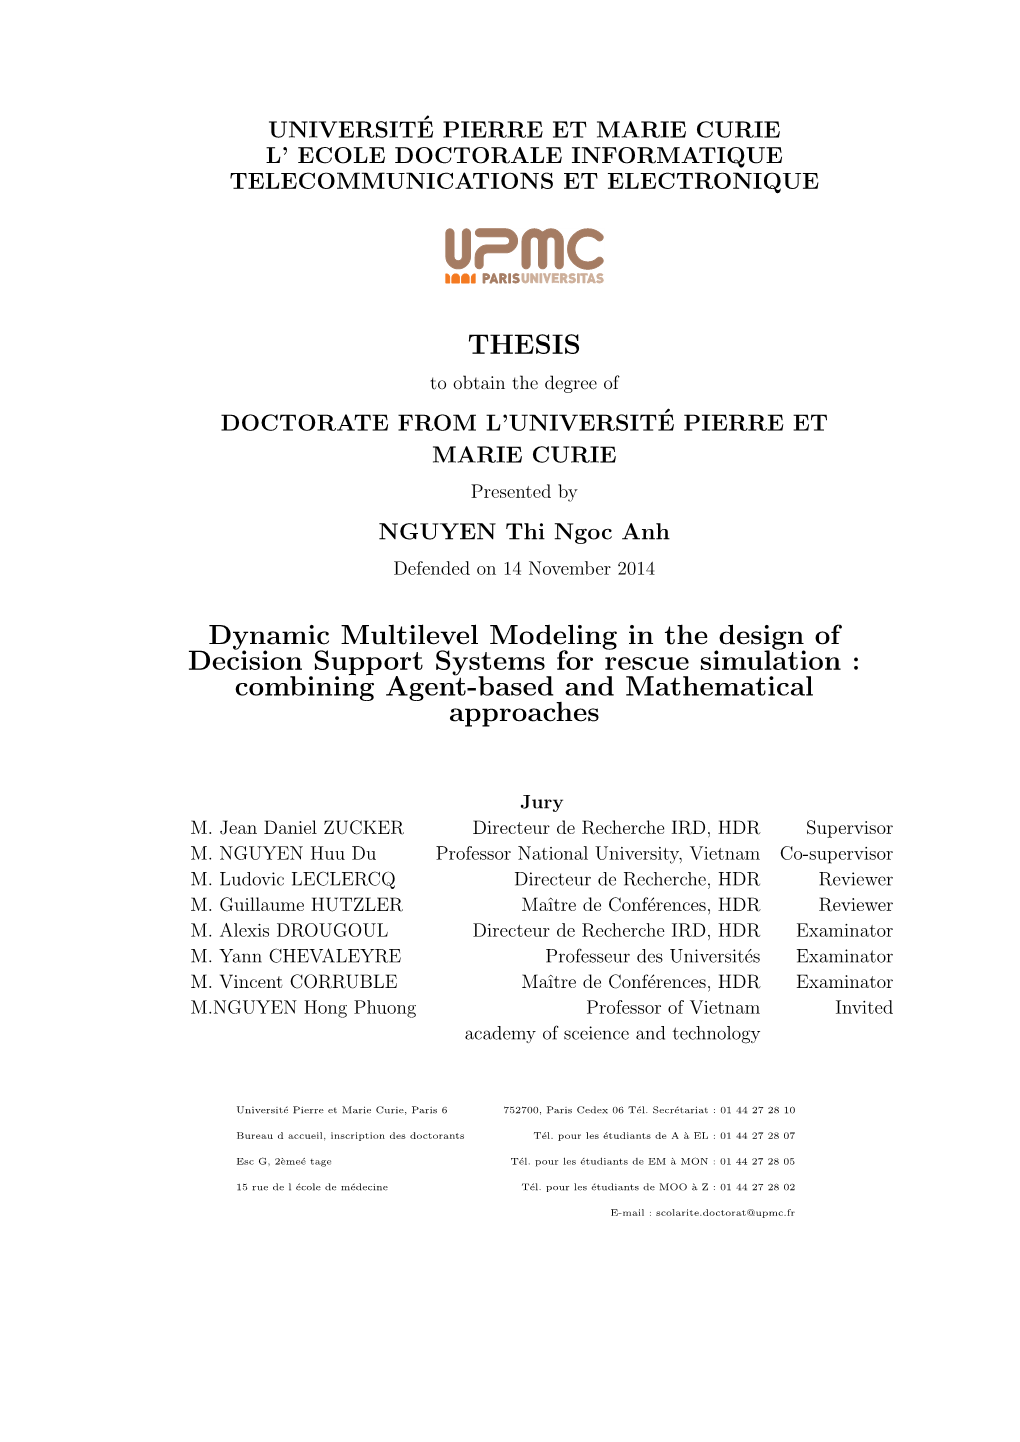 THESIS Dynamic Multilevel Modeling in the Design of Decision Support